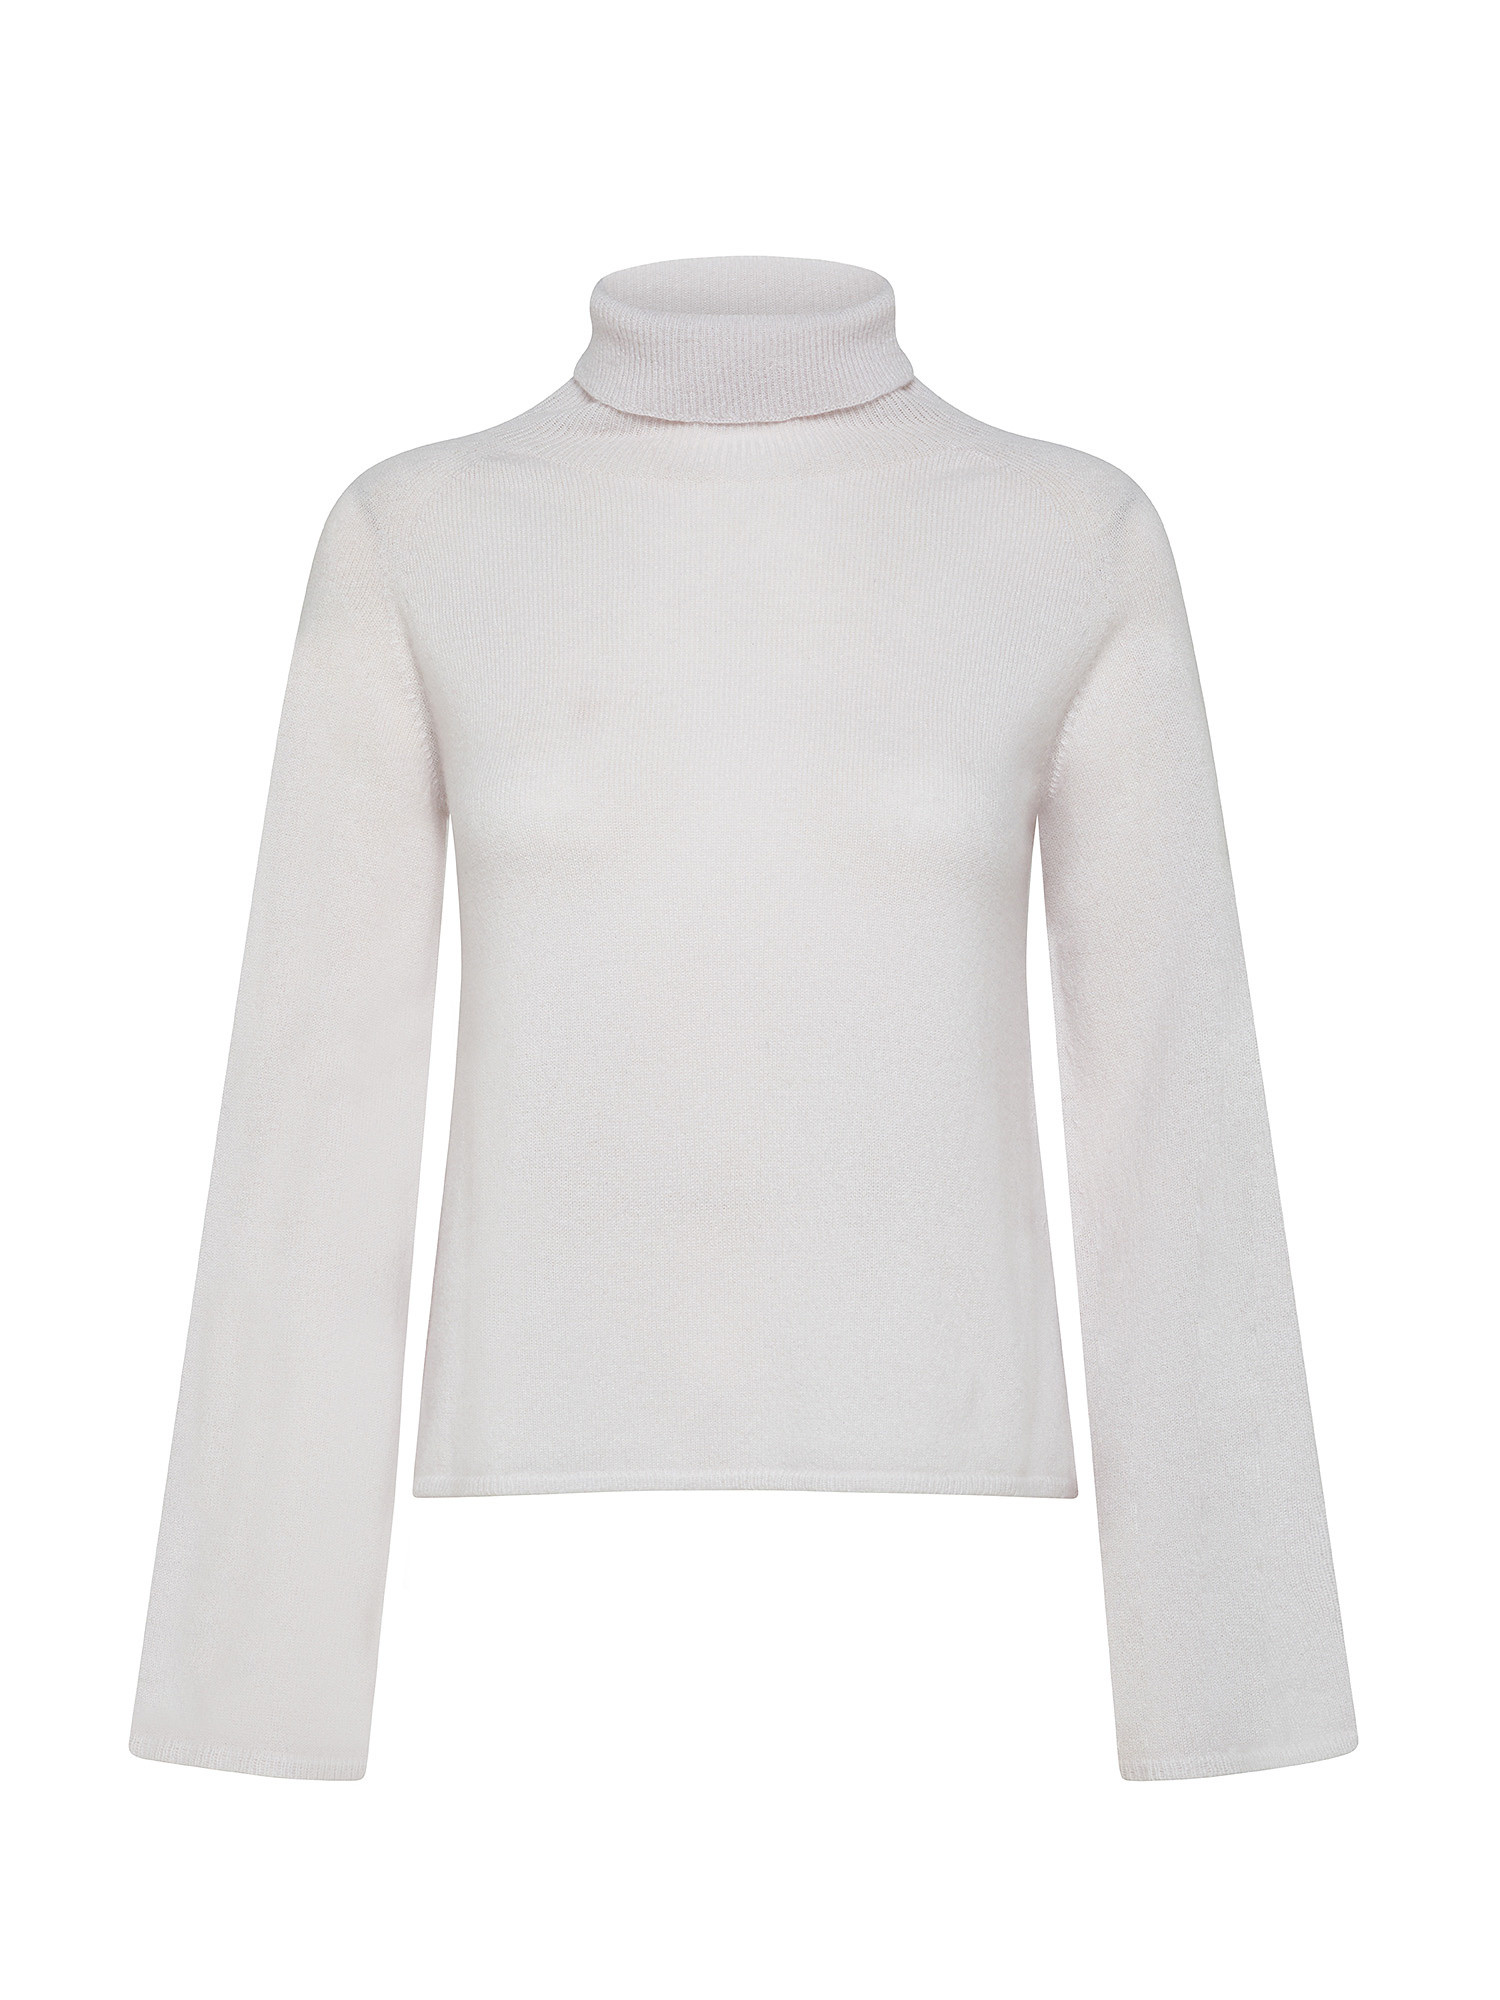 Coin Cashmere - Turtleneck in pure premium cashmere, White, large image number 0